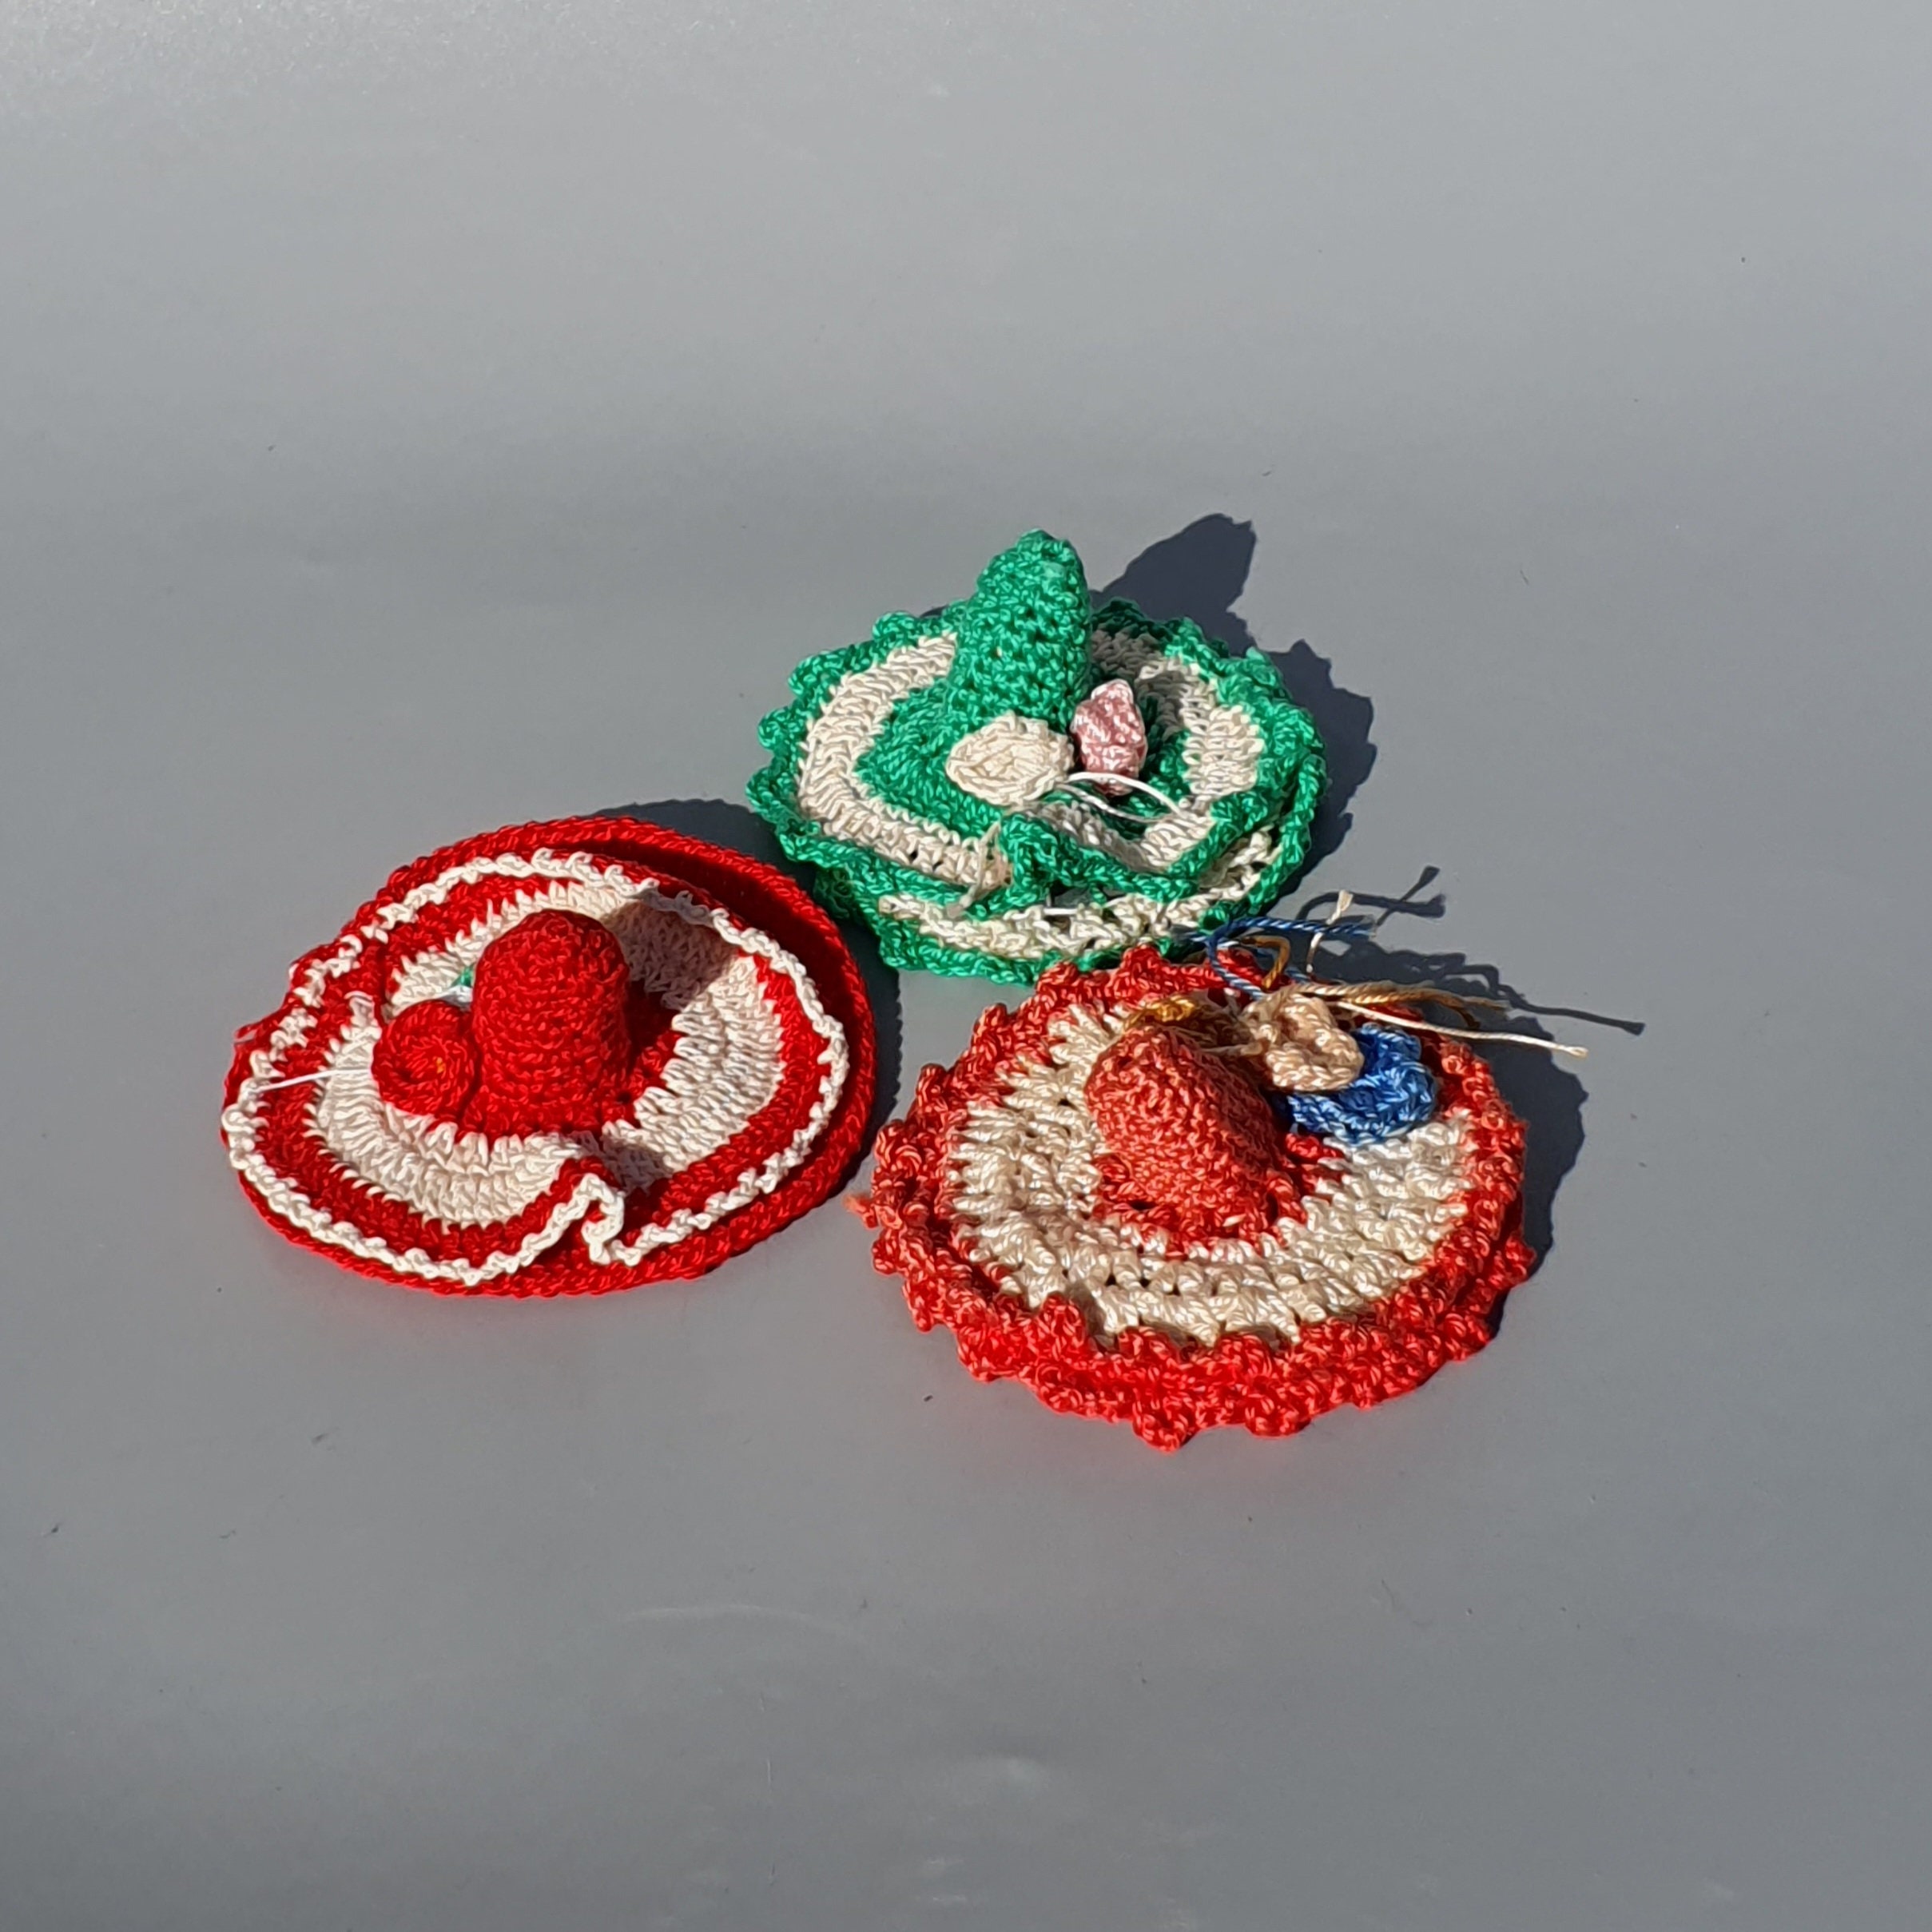 Custom-made to Your Size, Crochet Knitting Rings Provide a